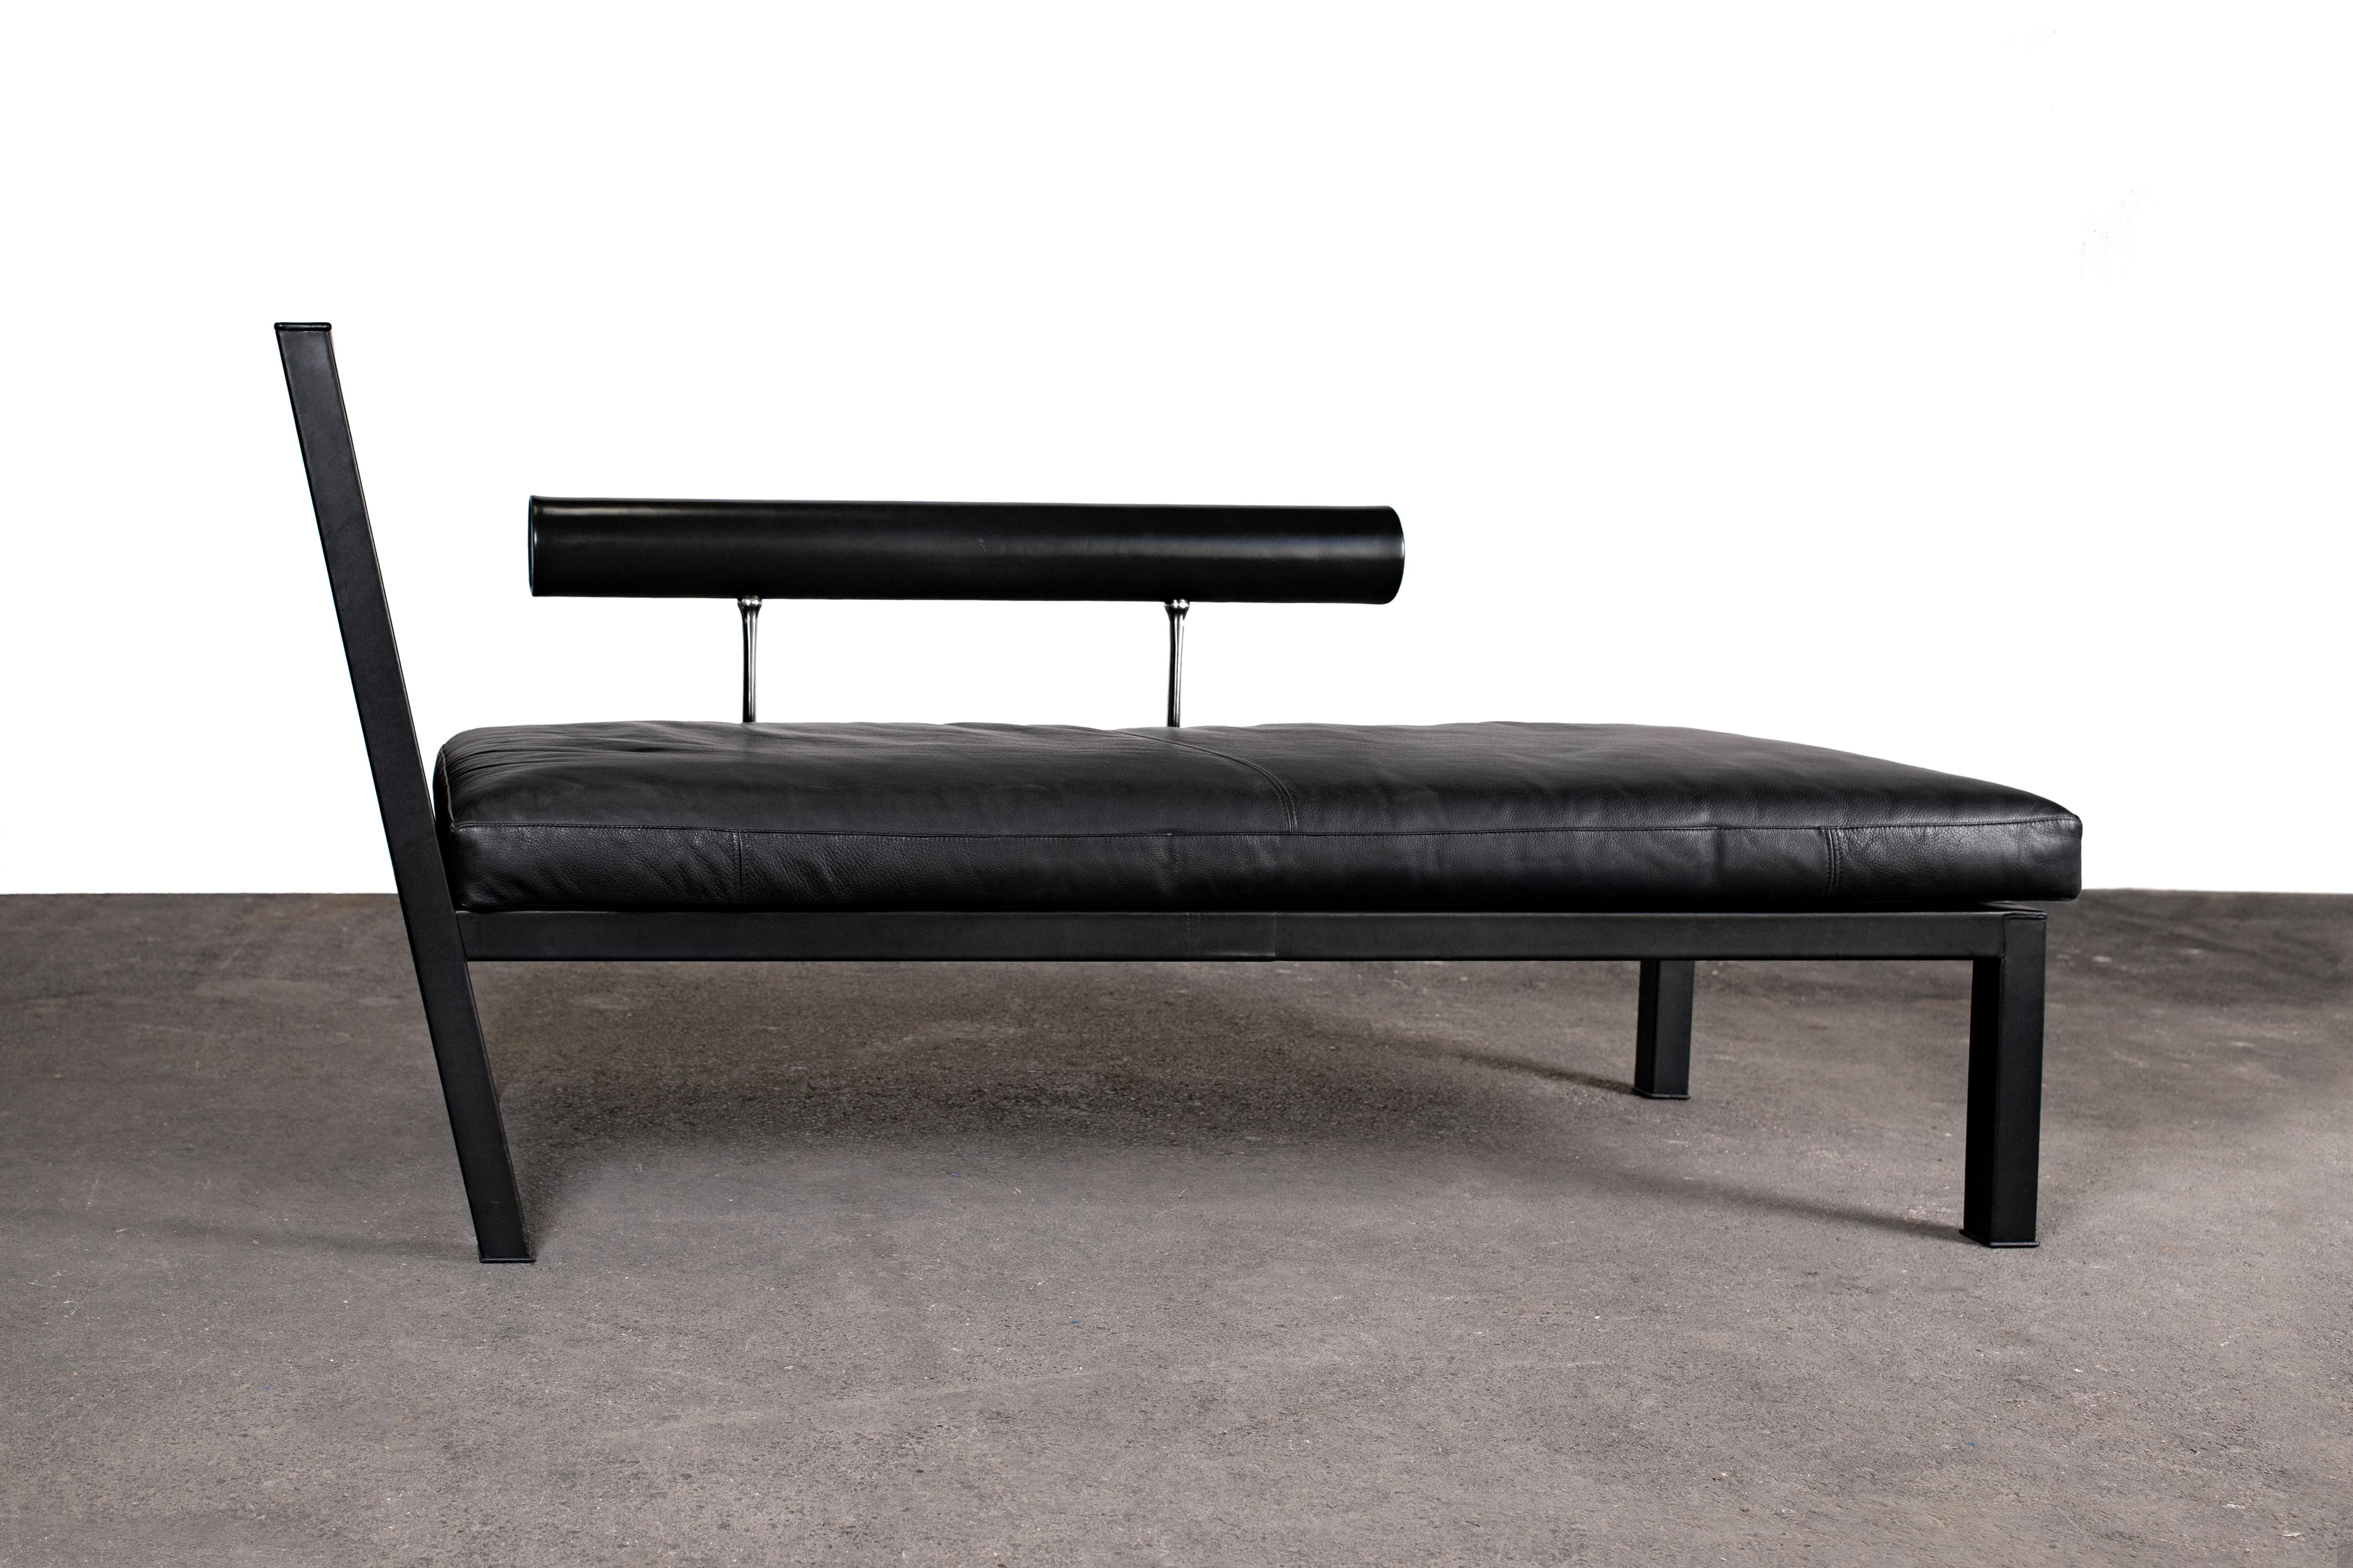 Strikingly chic and elegant chaise lounge by Antonio Citterio for B&B Italia. One of the most desirable and rare pieces of the Sity range from 1986.

This piece is fabricated in steel frame covered in black leather. Tubular black leather armrest